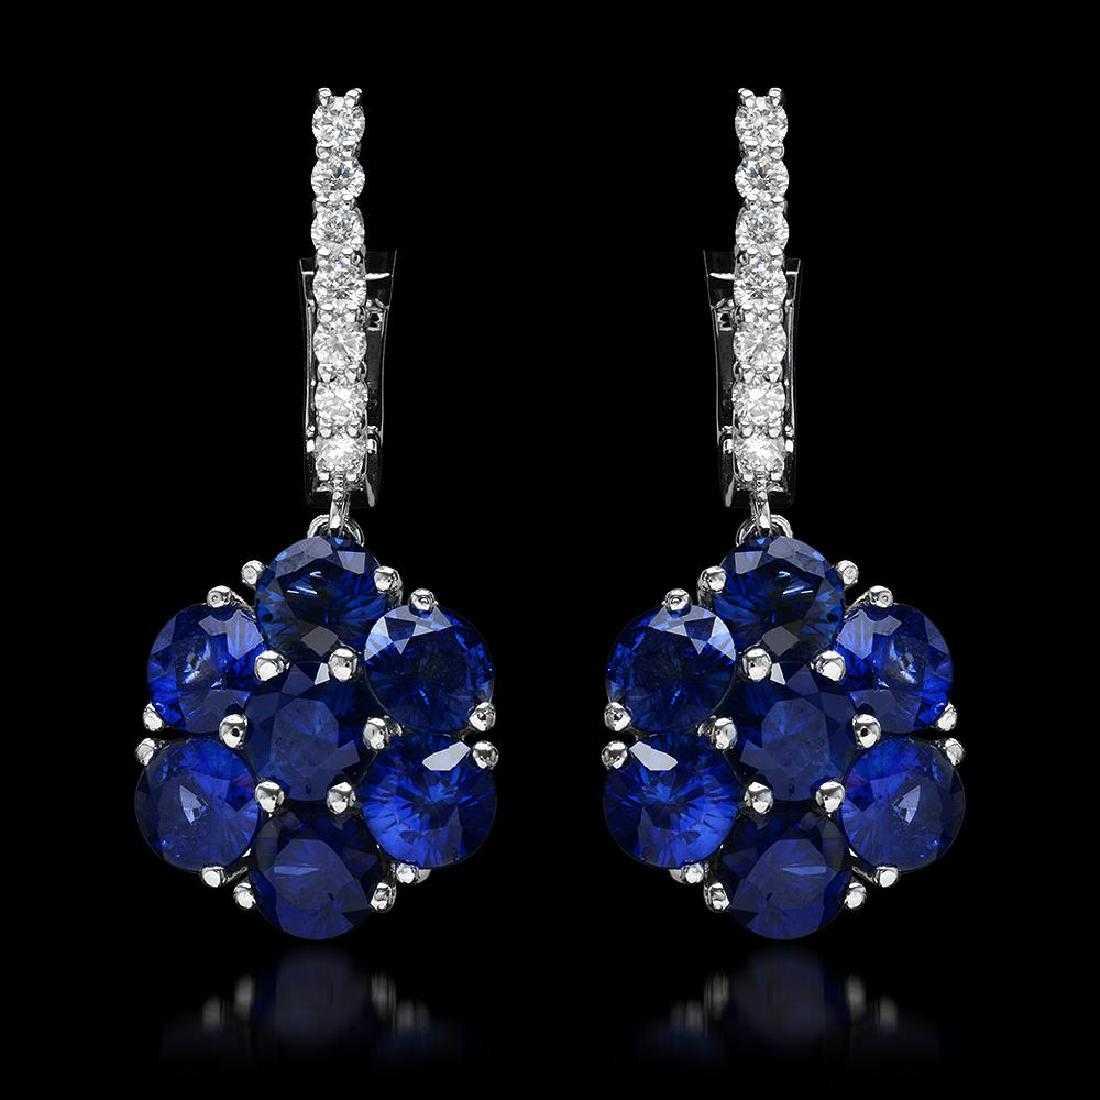 14K White Gold 5.72ct Sapphire and 0.45ct Diamond Earrings